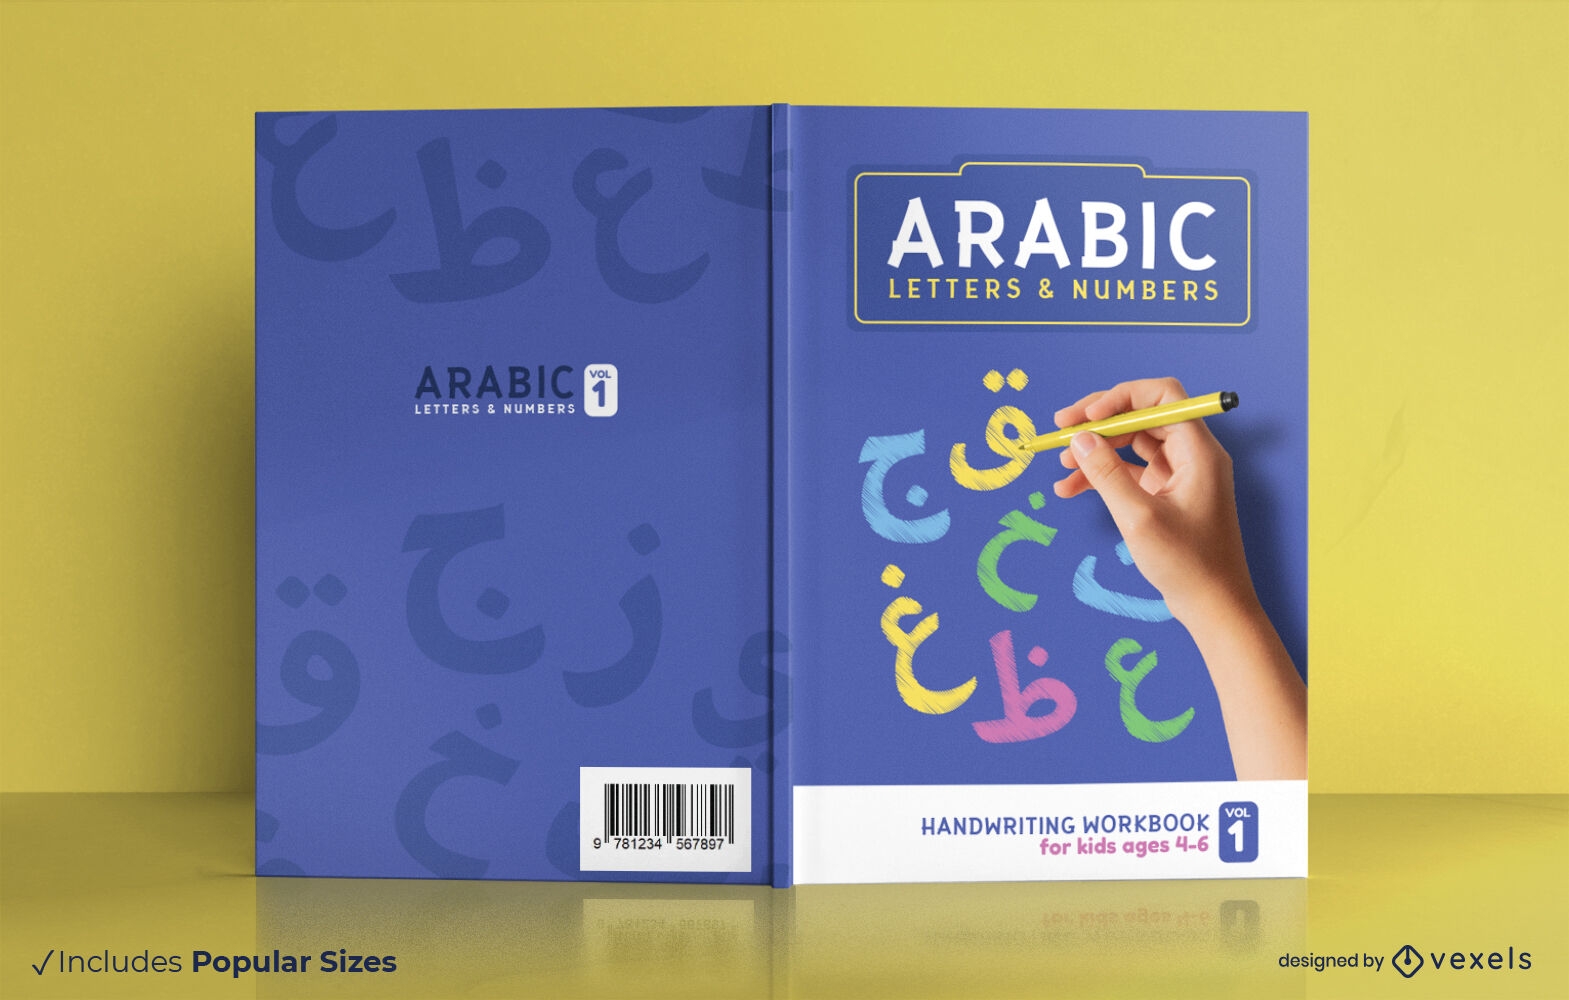 Arabic letters and numbers book cover design